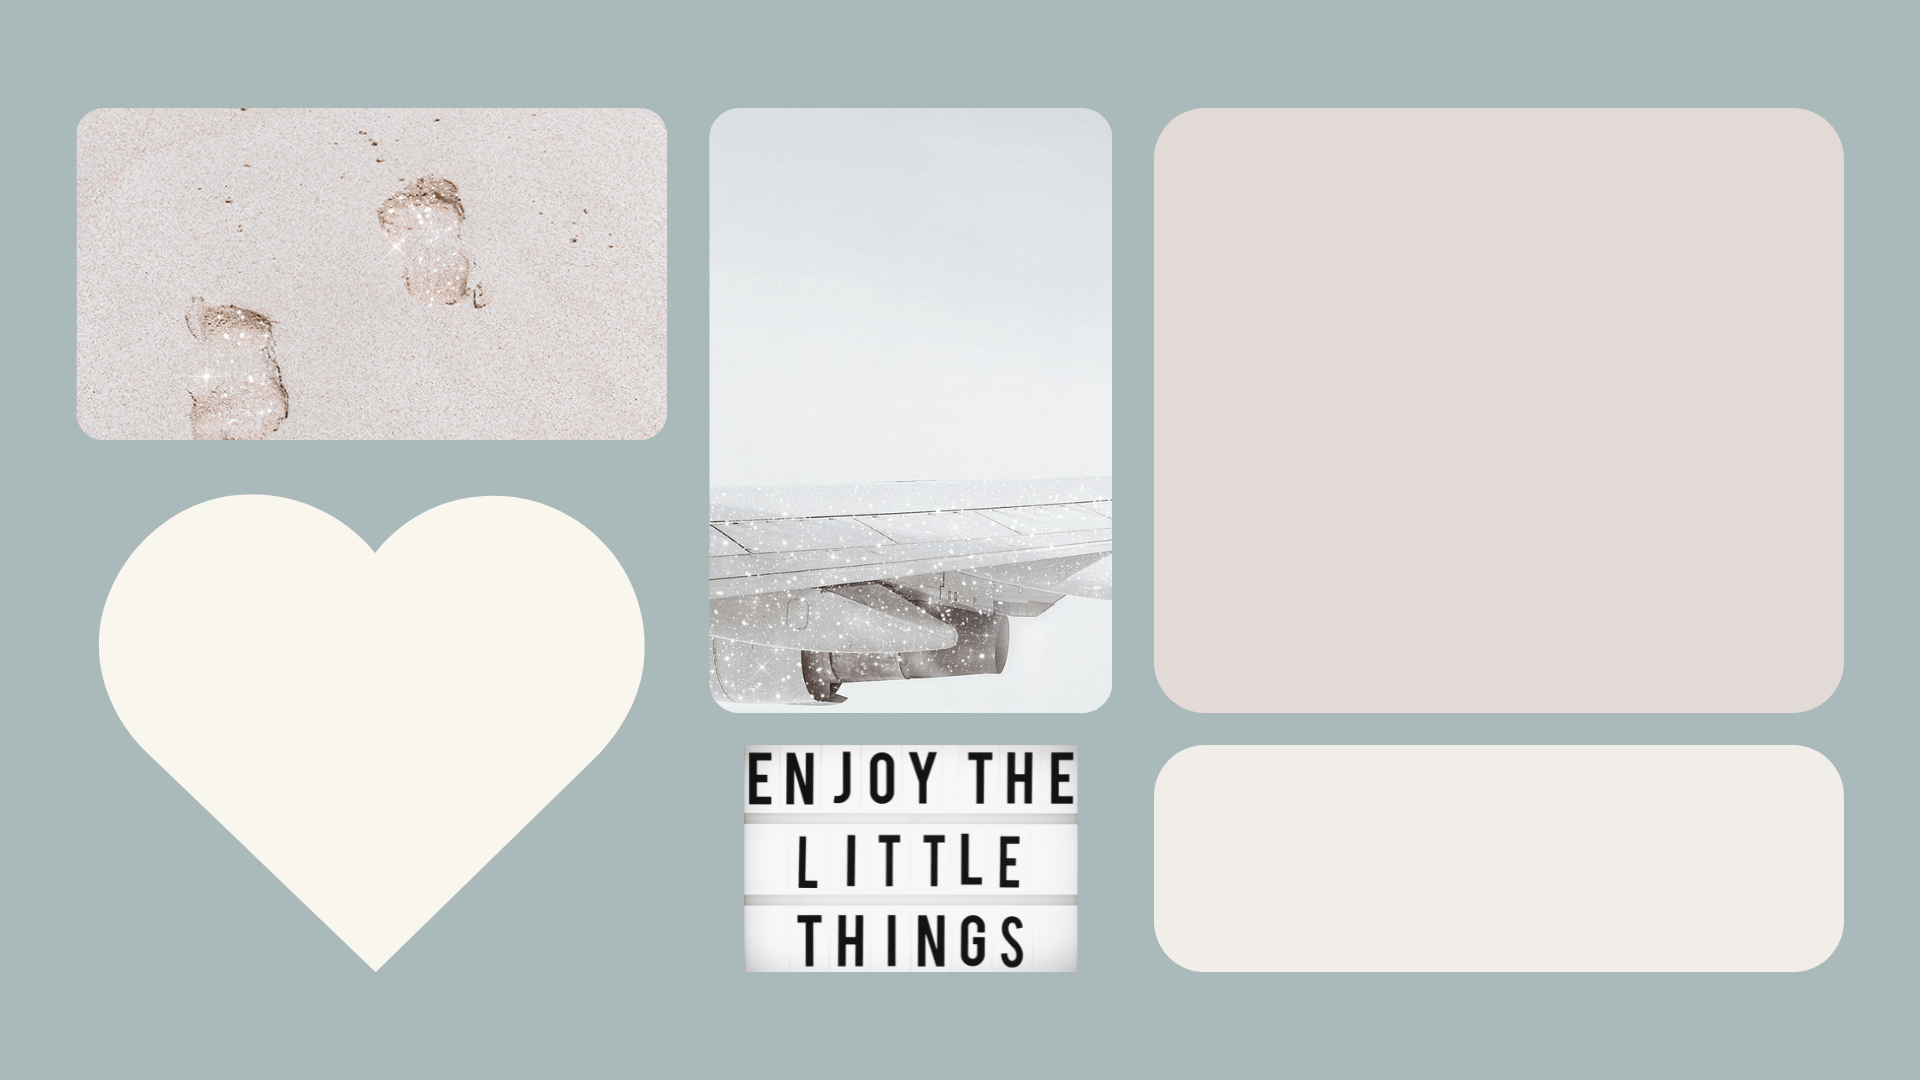 A collage of photos and captions including a heart, footsteps in the sand, a pier, and 